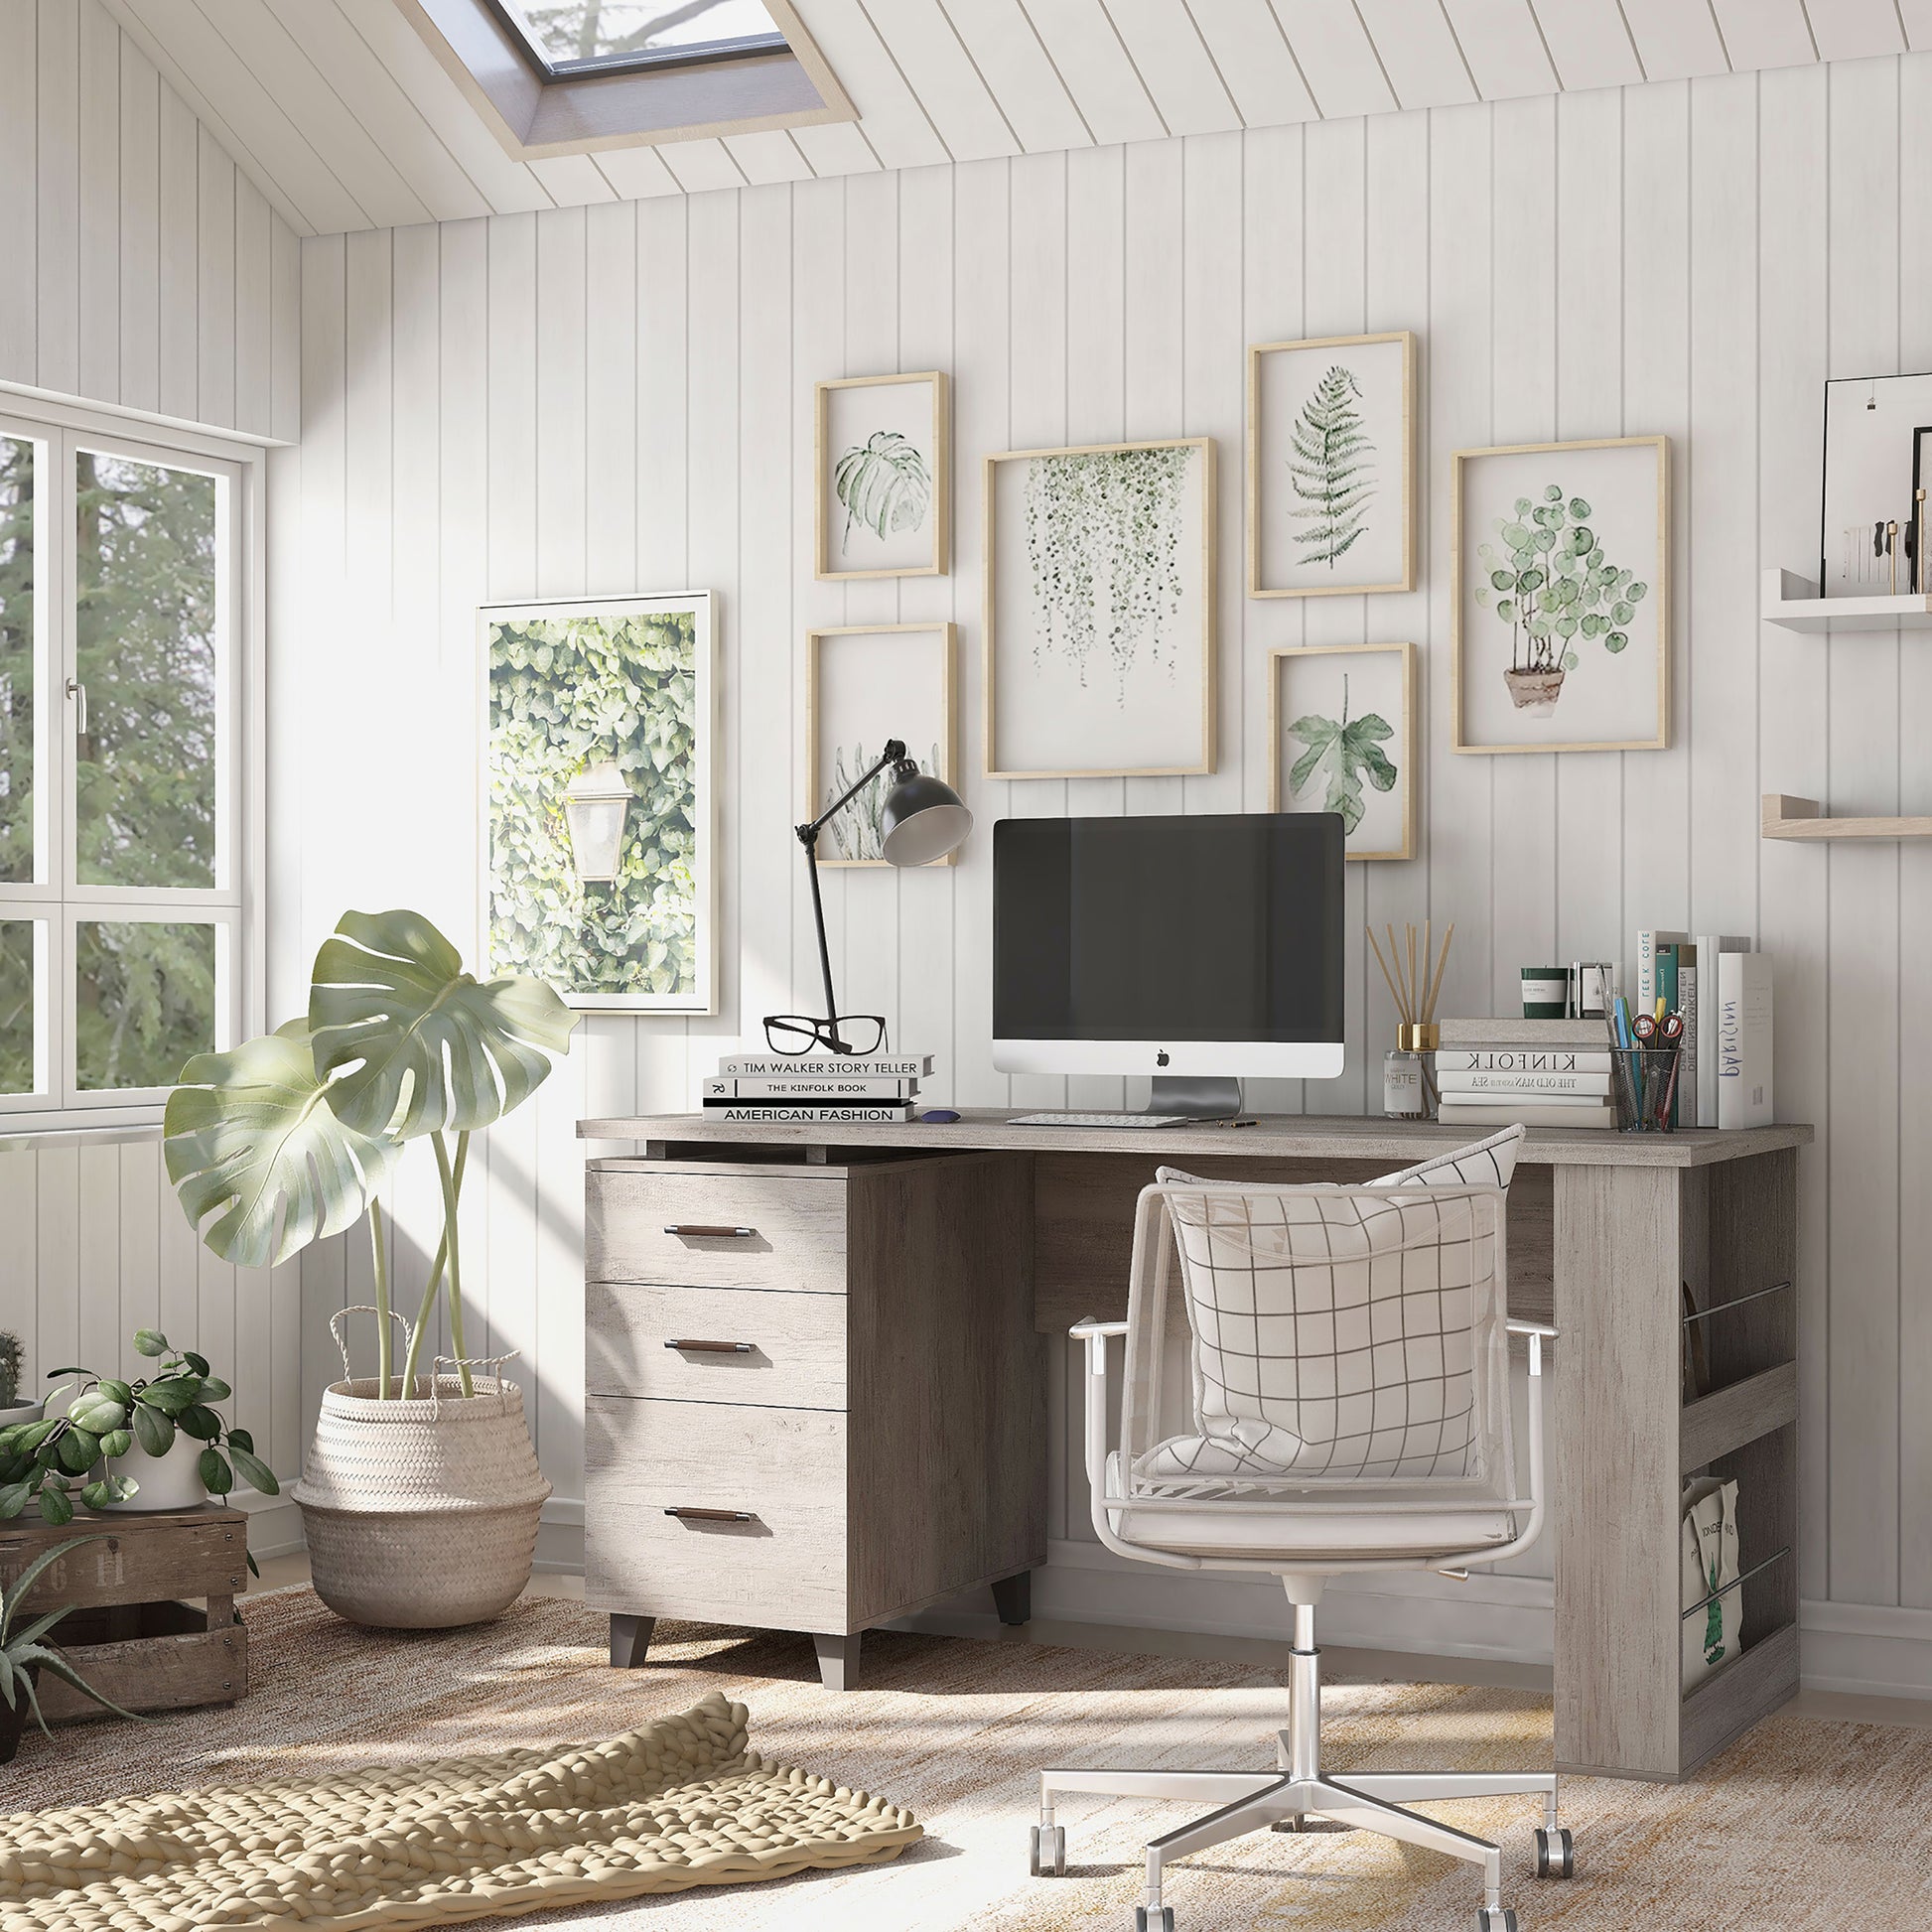 Left angled transitional coastal white three-drawer office desk with magazine racks in a home office with accessories